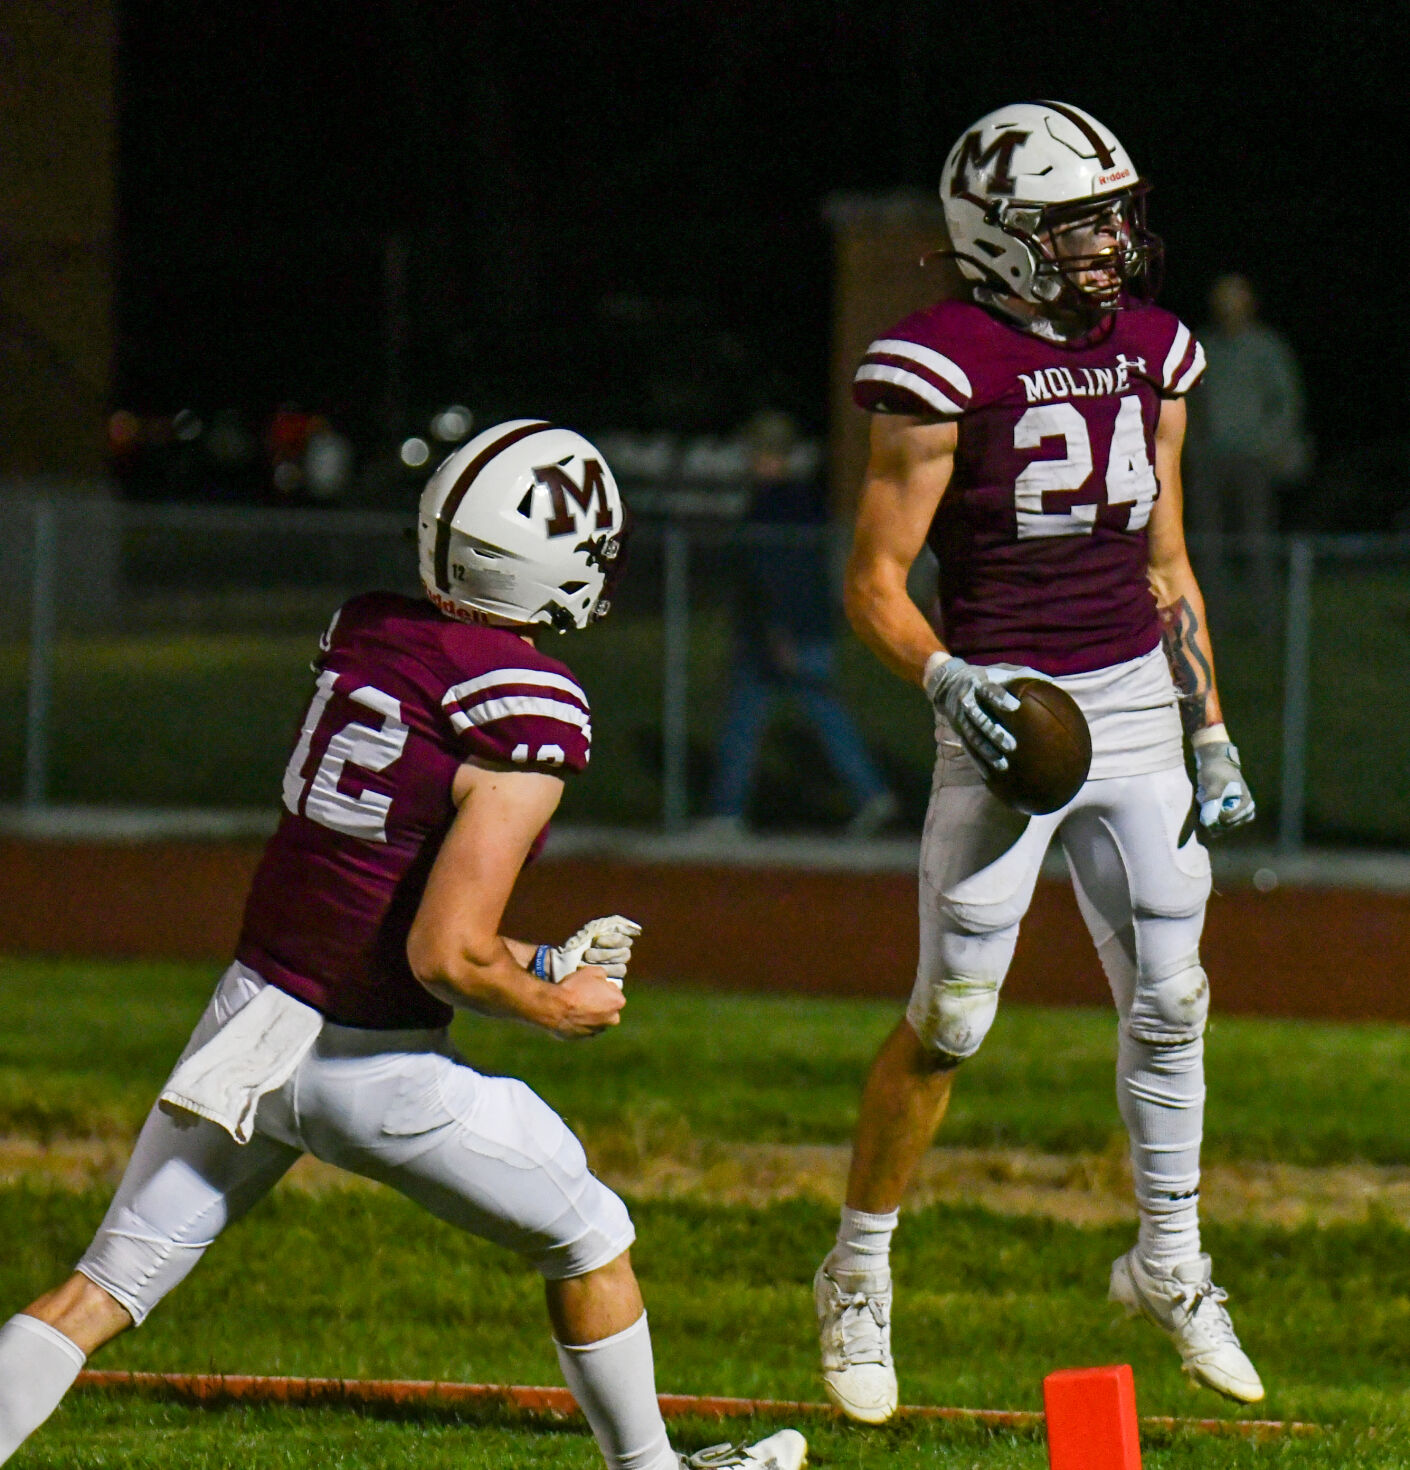 Moline aims for victory against Sterling to enhance playoff prospects after dominant win over Galesburg